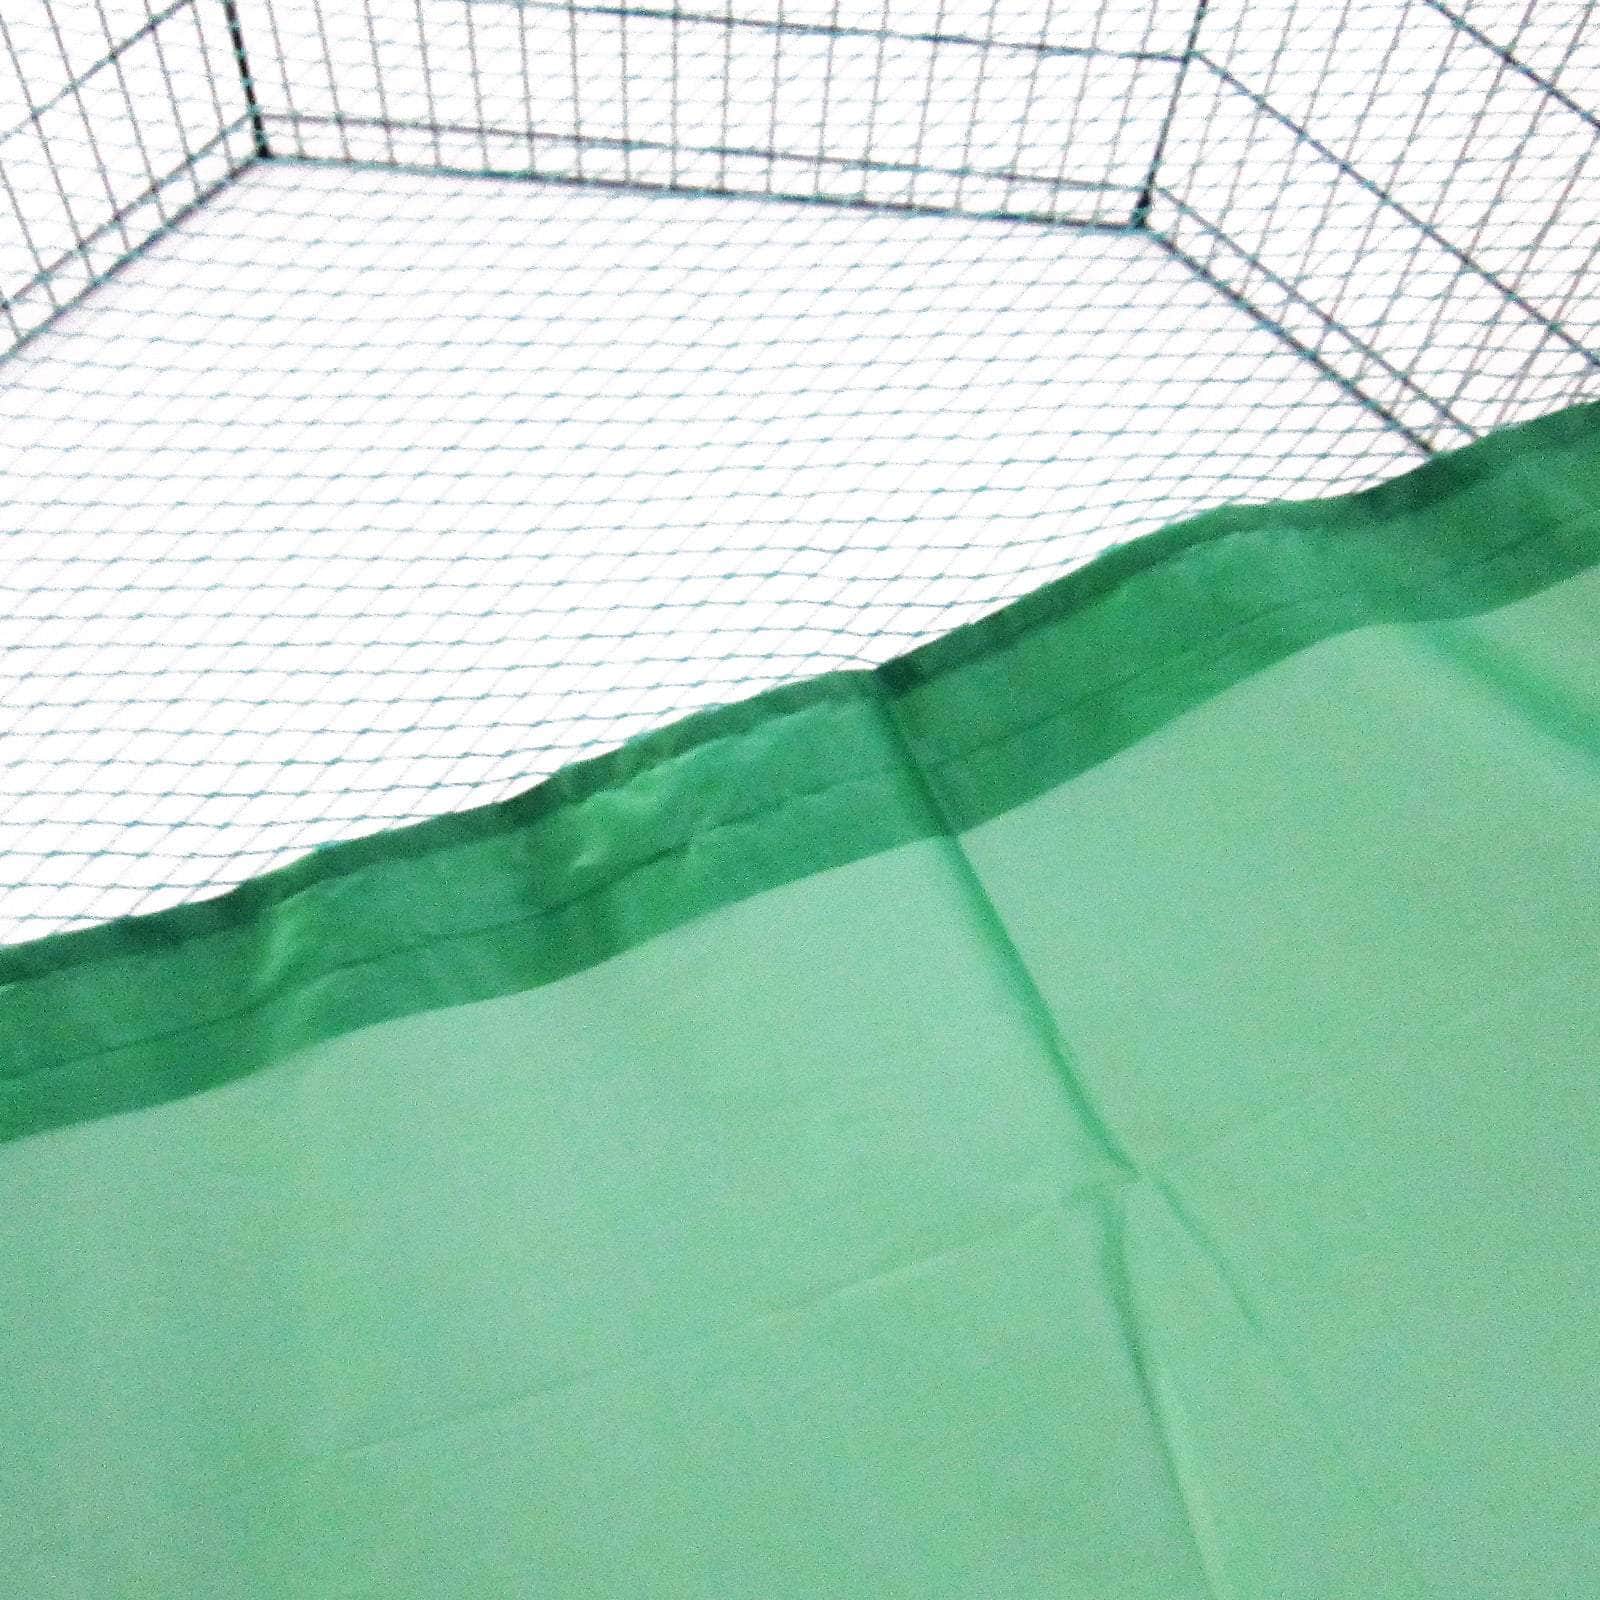 Green Net Cover For Pet Playpen 36In Dog Exercise Enclosure Fence Cage